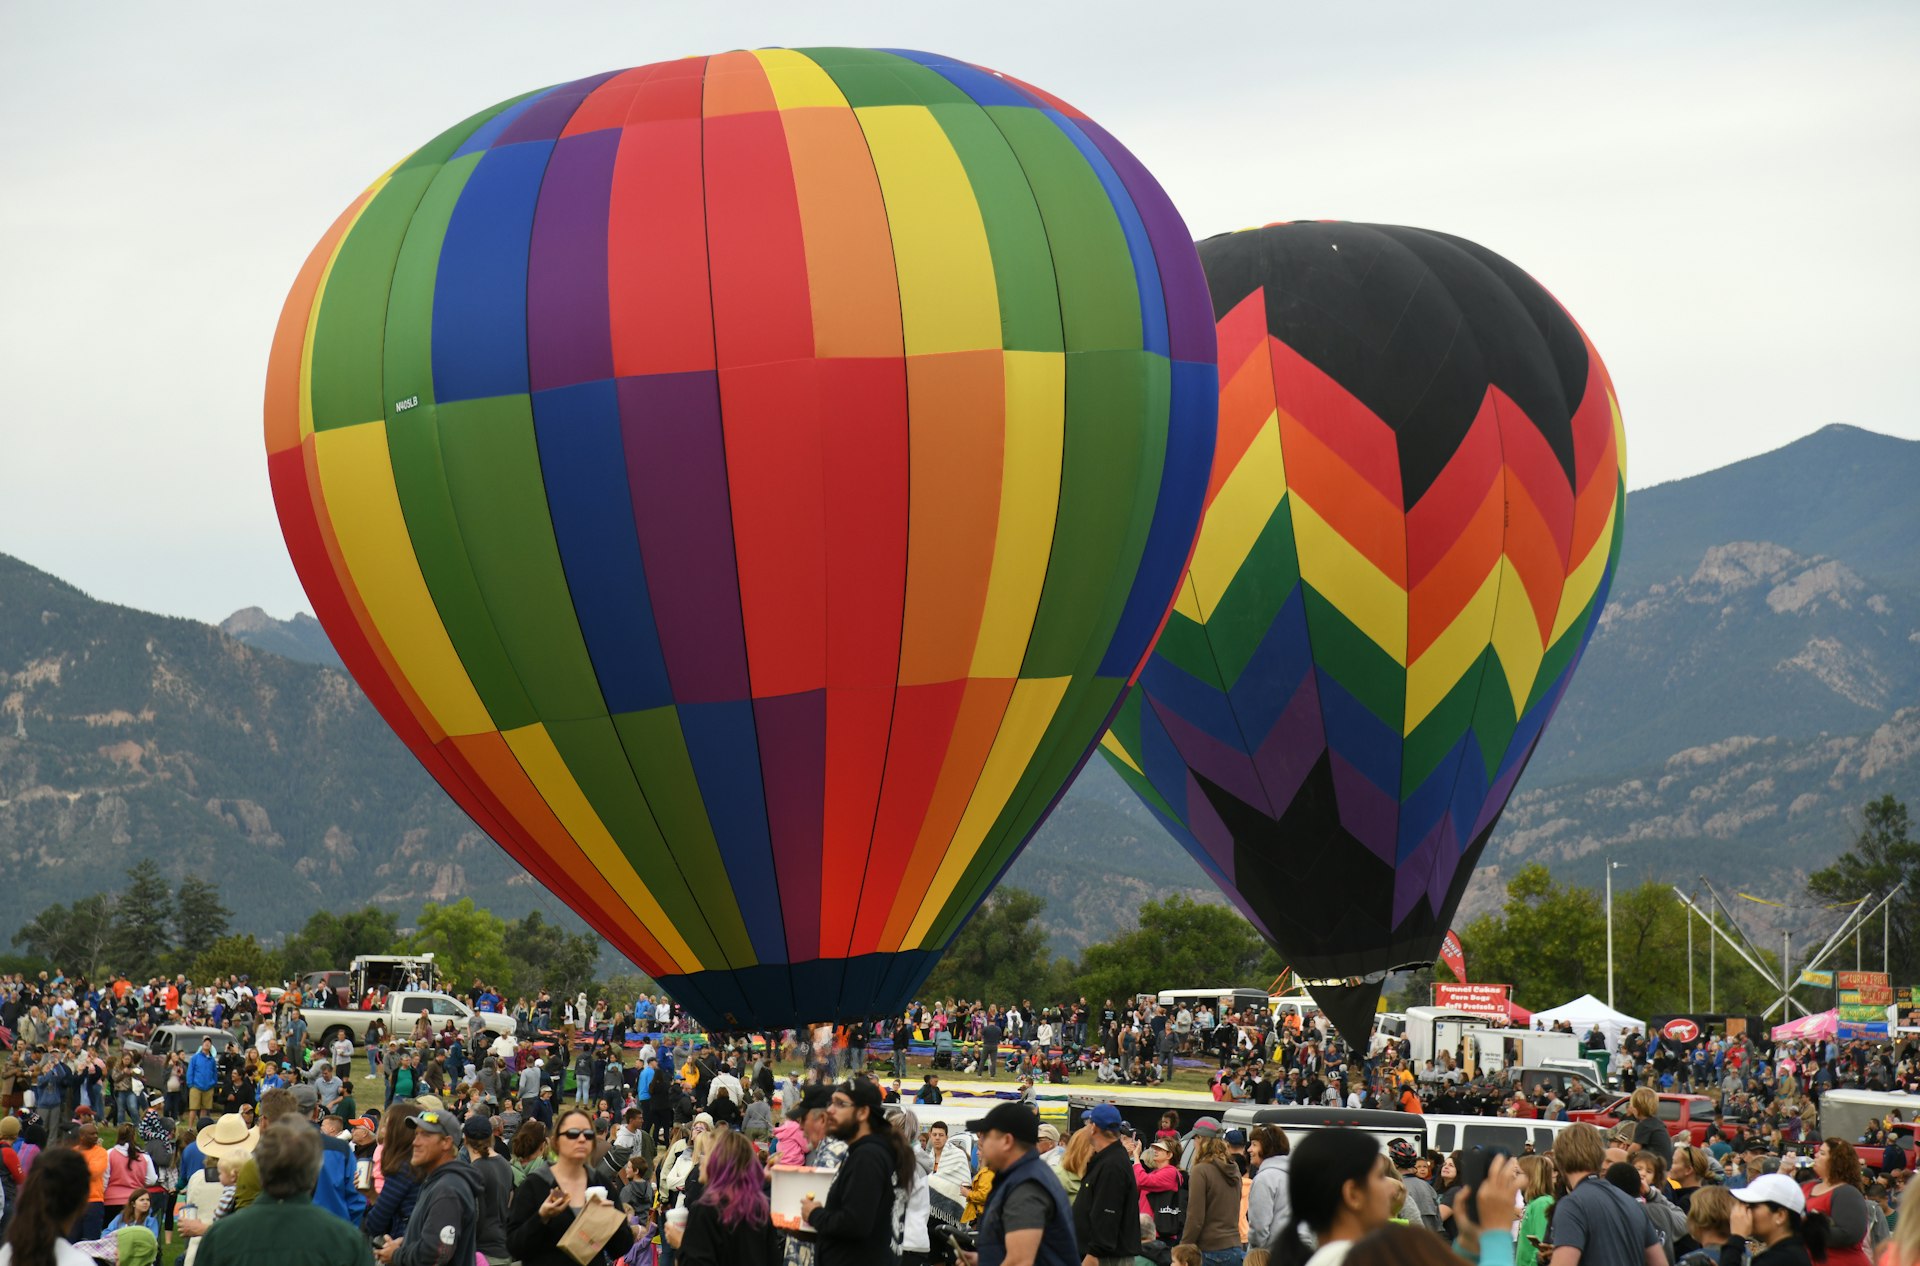 Hot air balloons in a crowded Memorial Park in Colorado Springs at Labor Day Lift Off